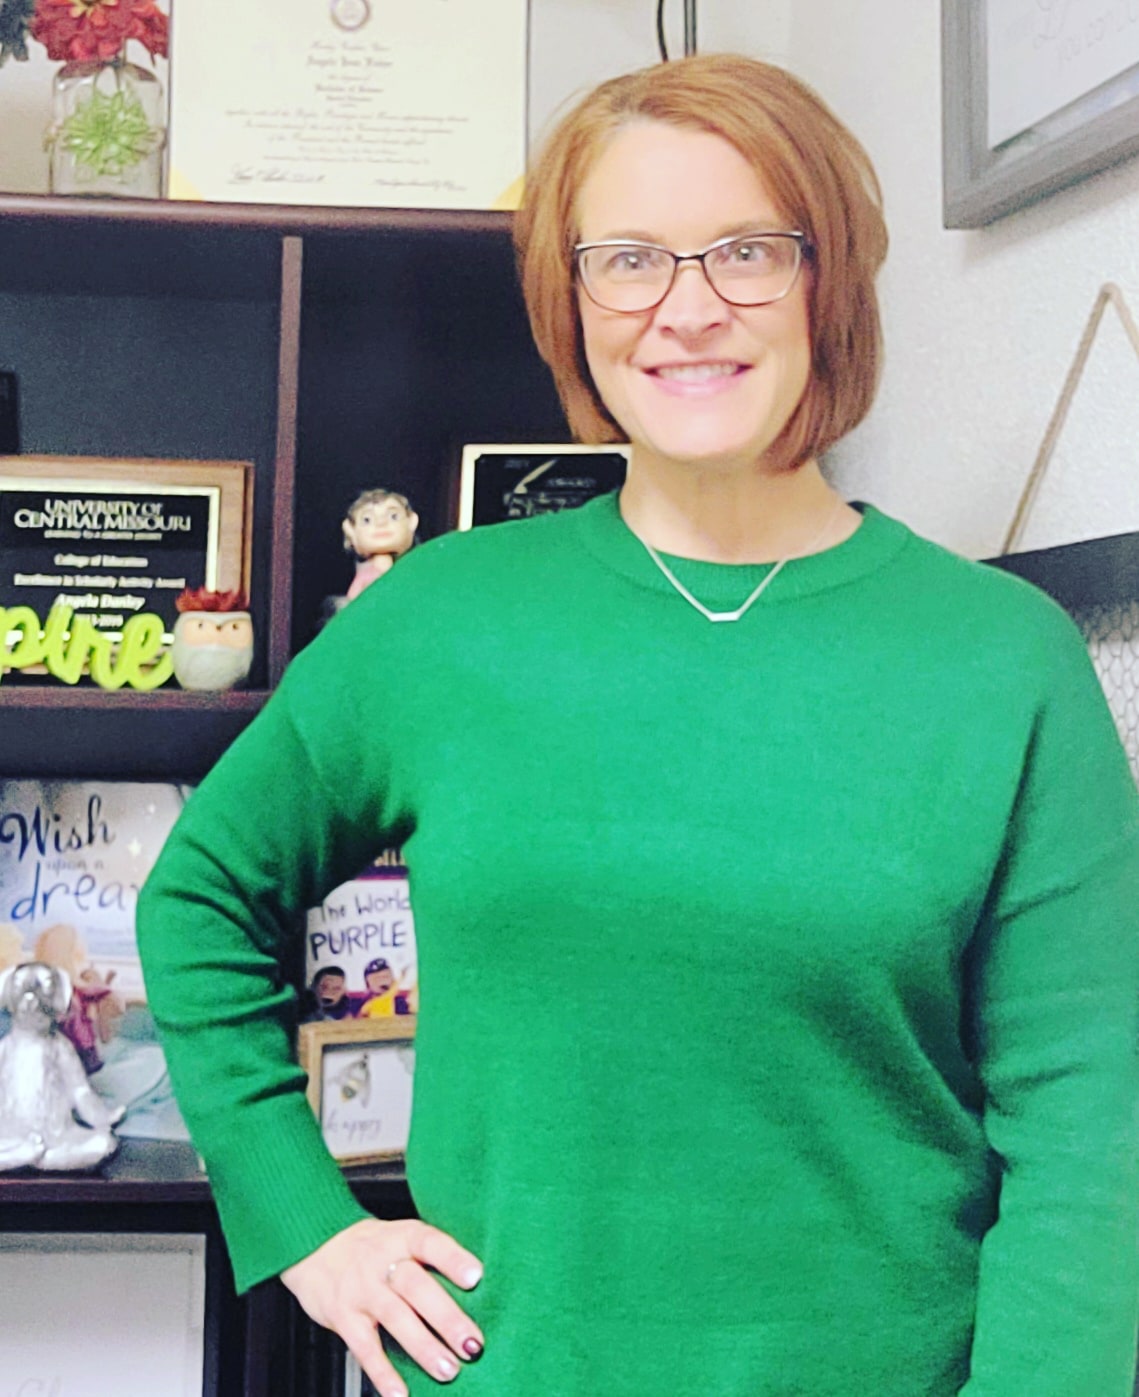 Danley is posing. She's wearing a green sweater. She has short red hair and glasses.